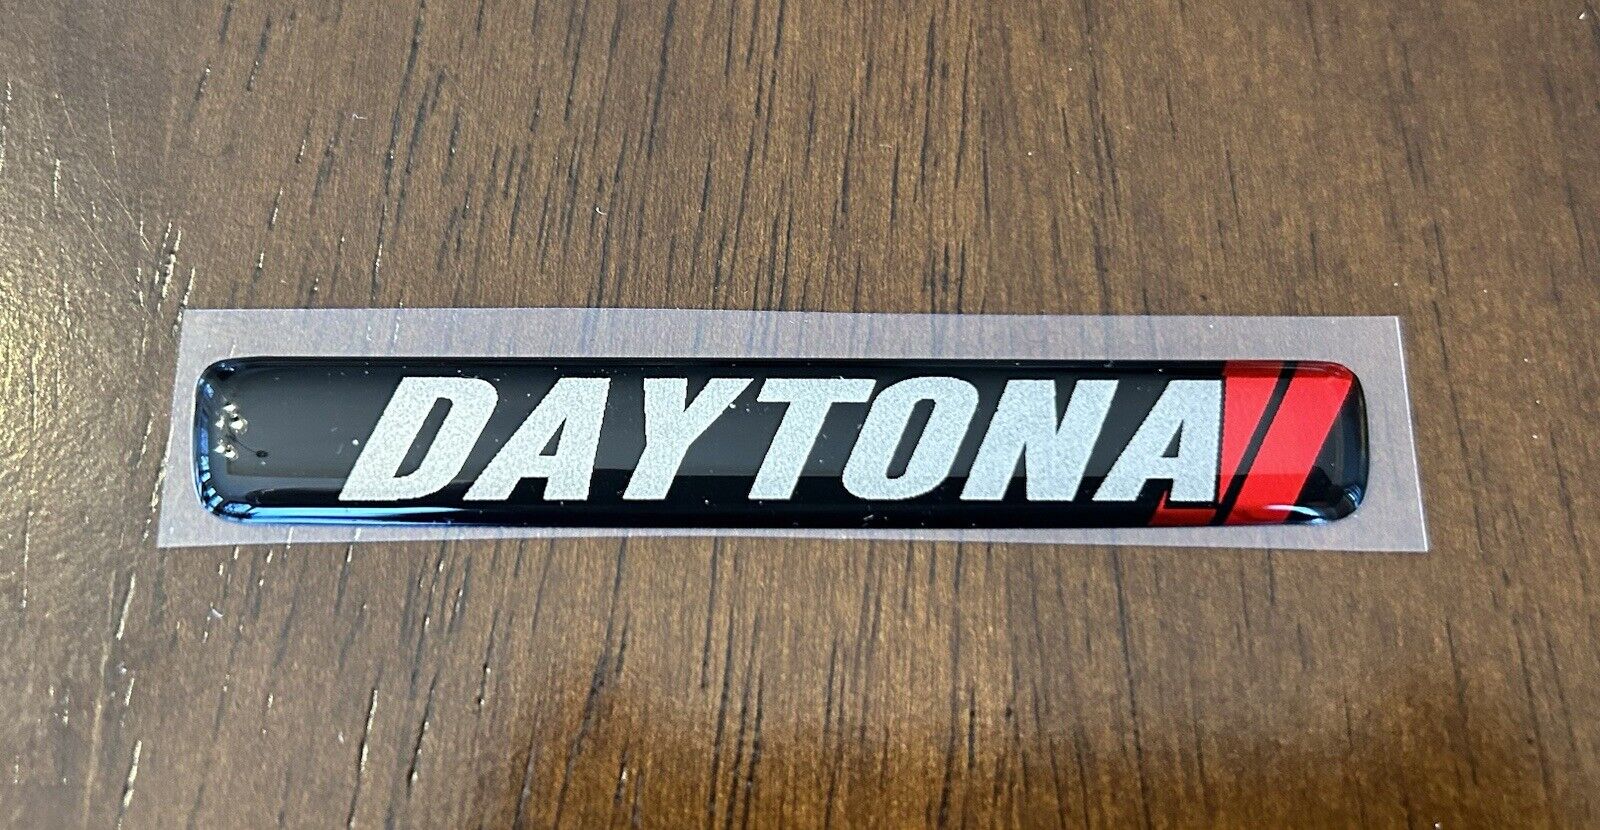 Daytona Charger Steering Wheel Badge With Red Dodge Stripes